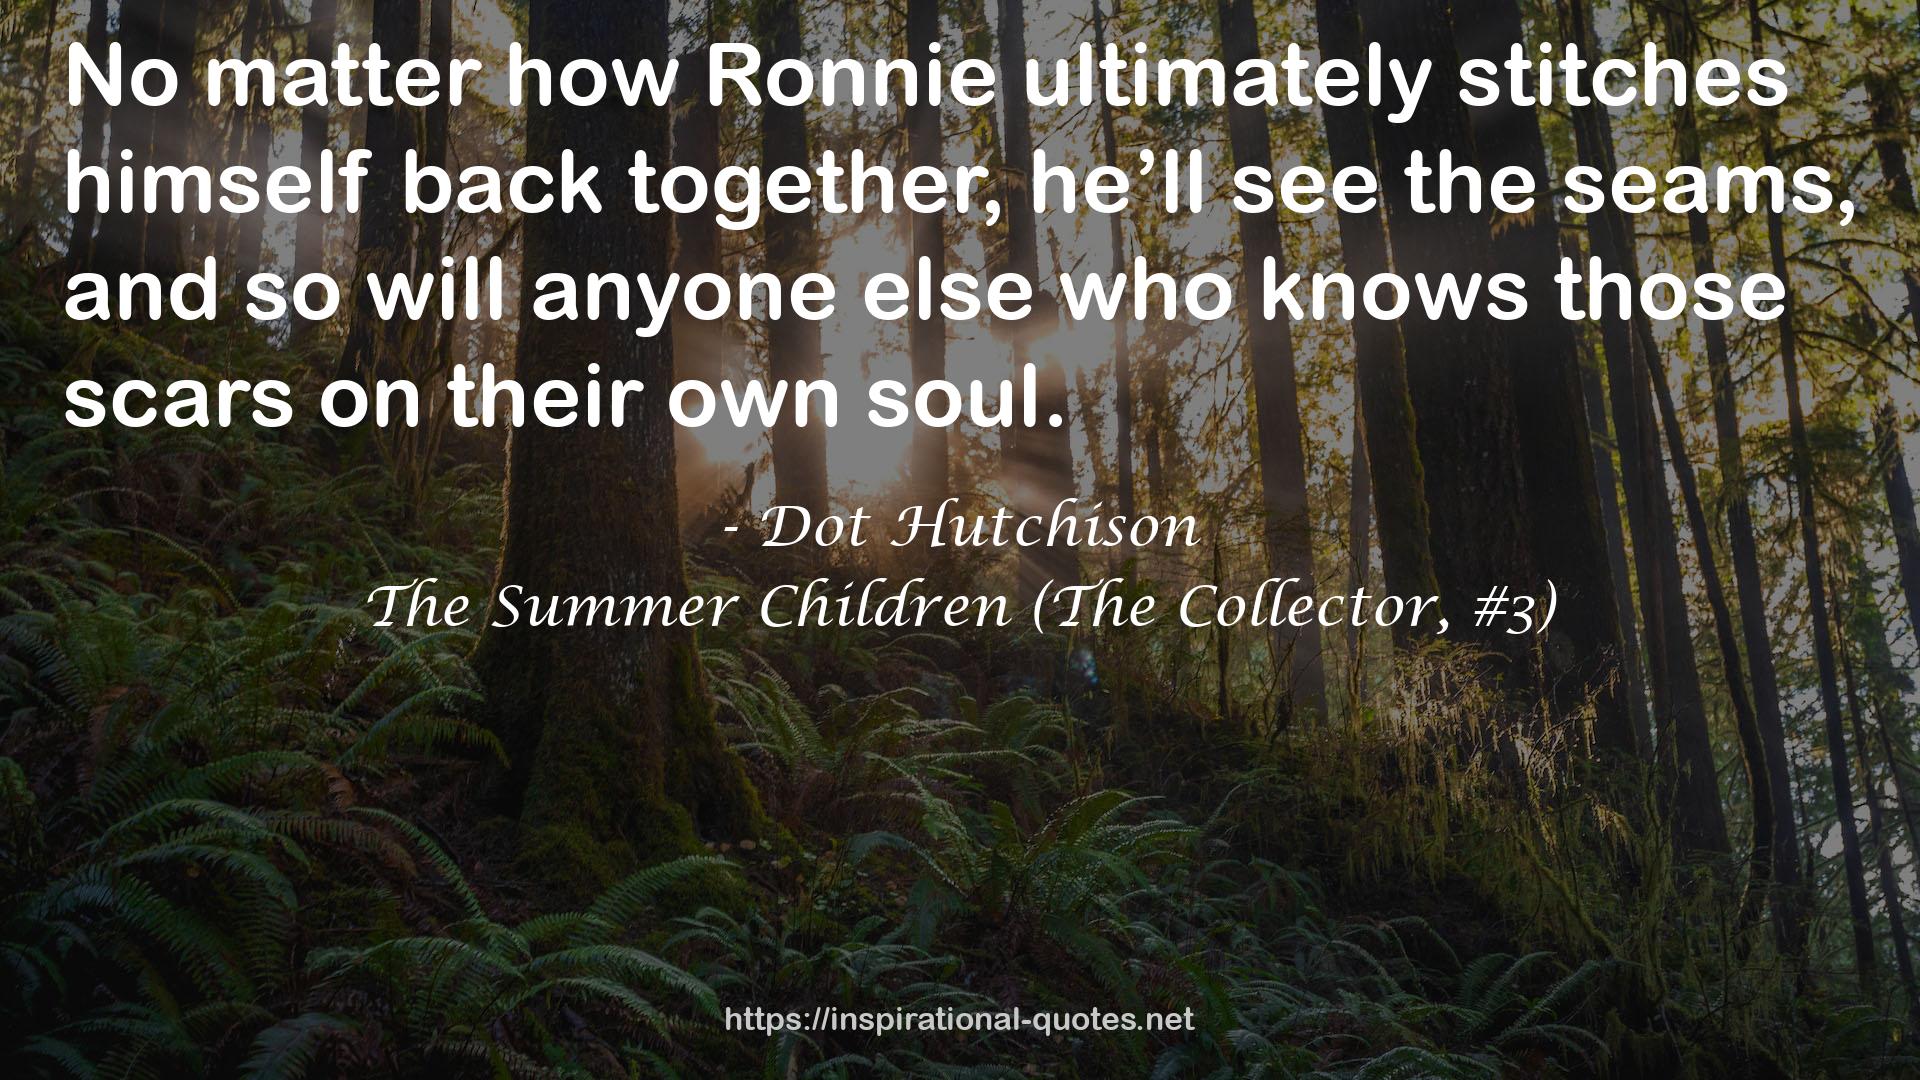 The Summer Children (The Collector, #3) QUOTES